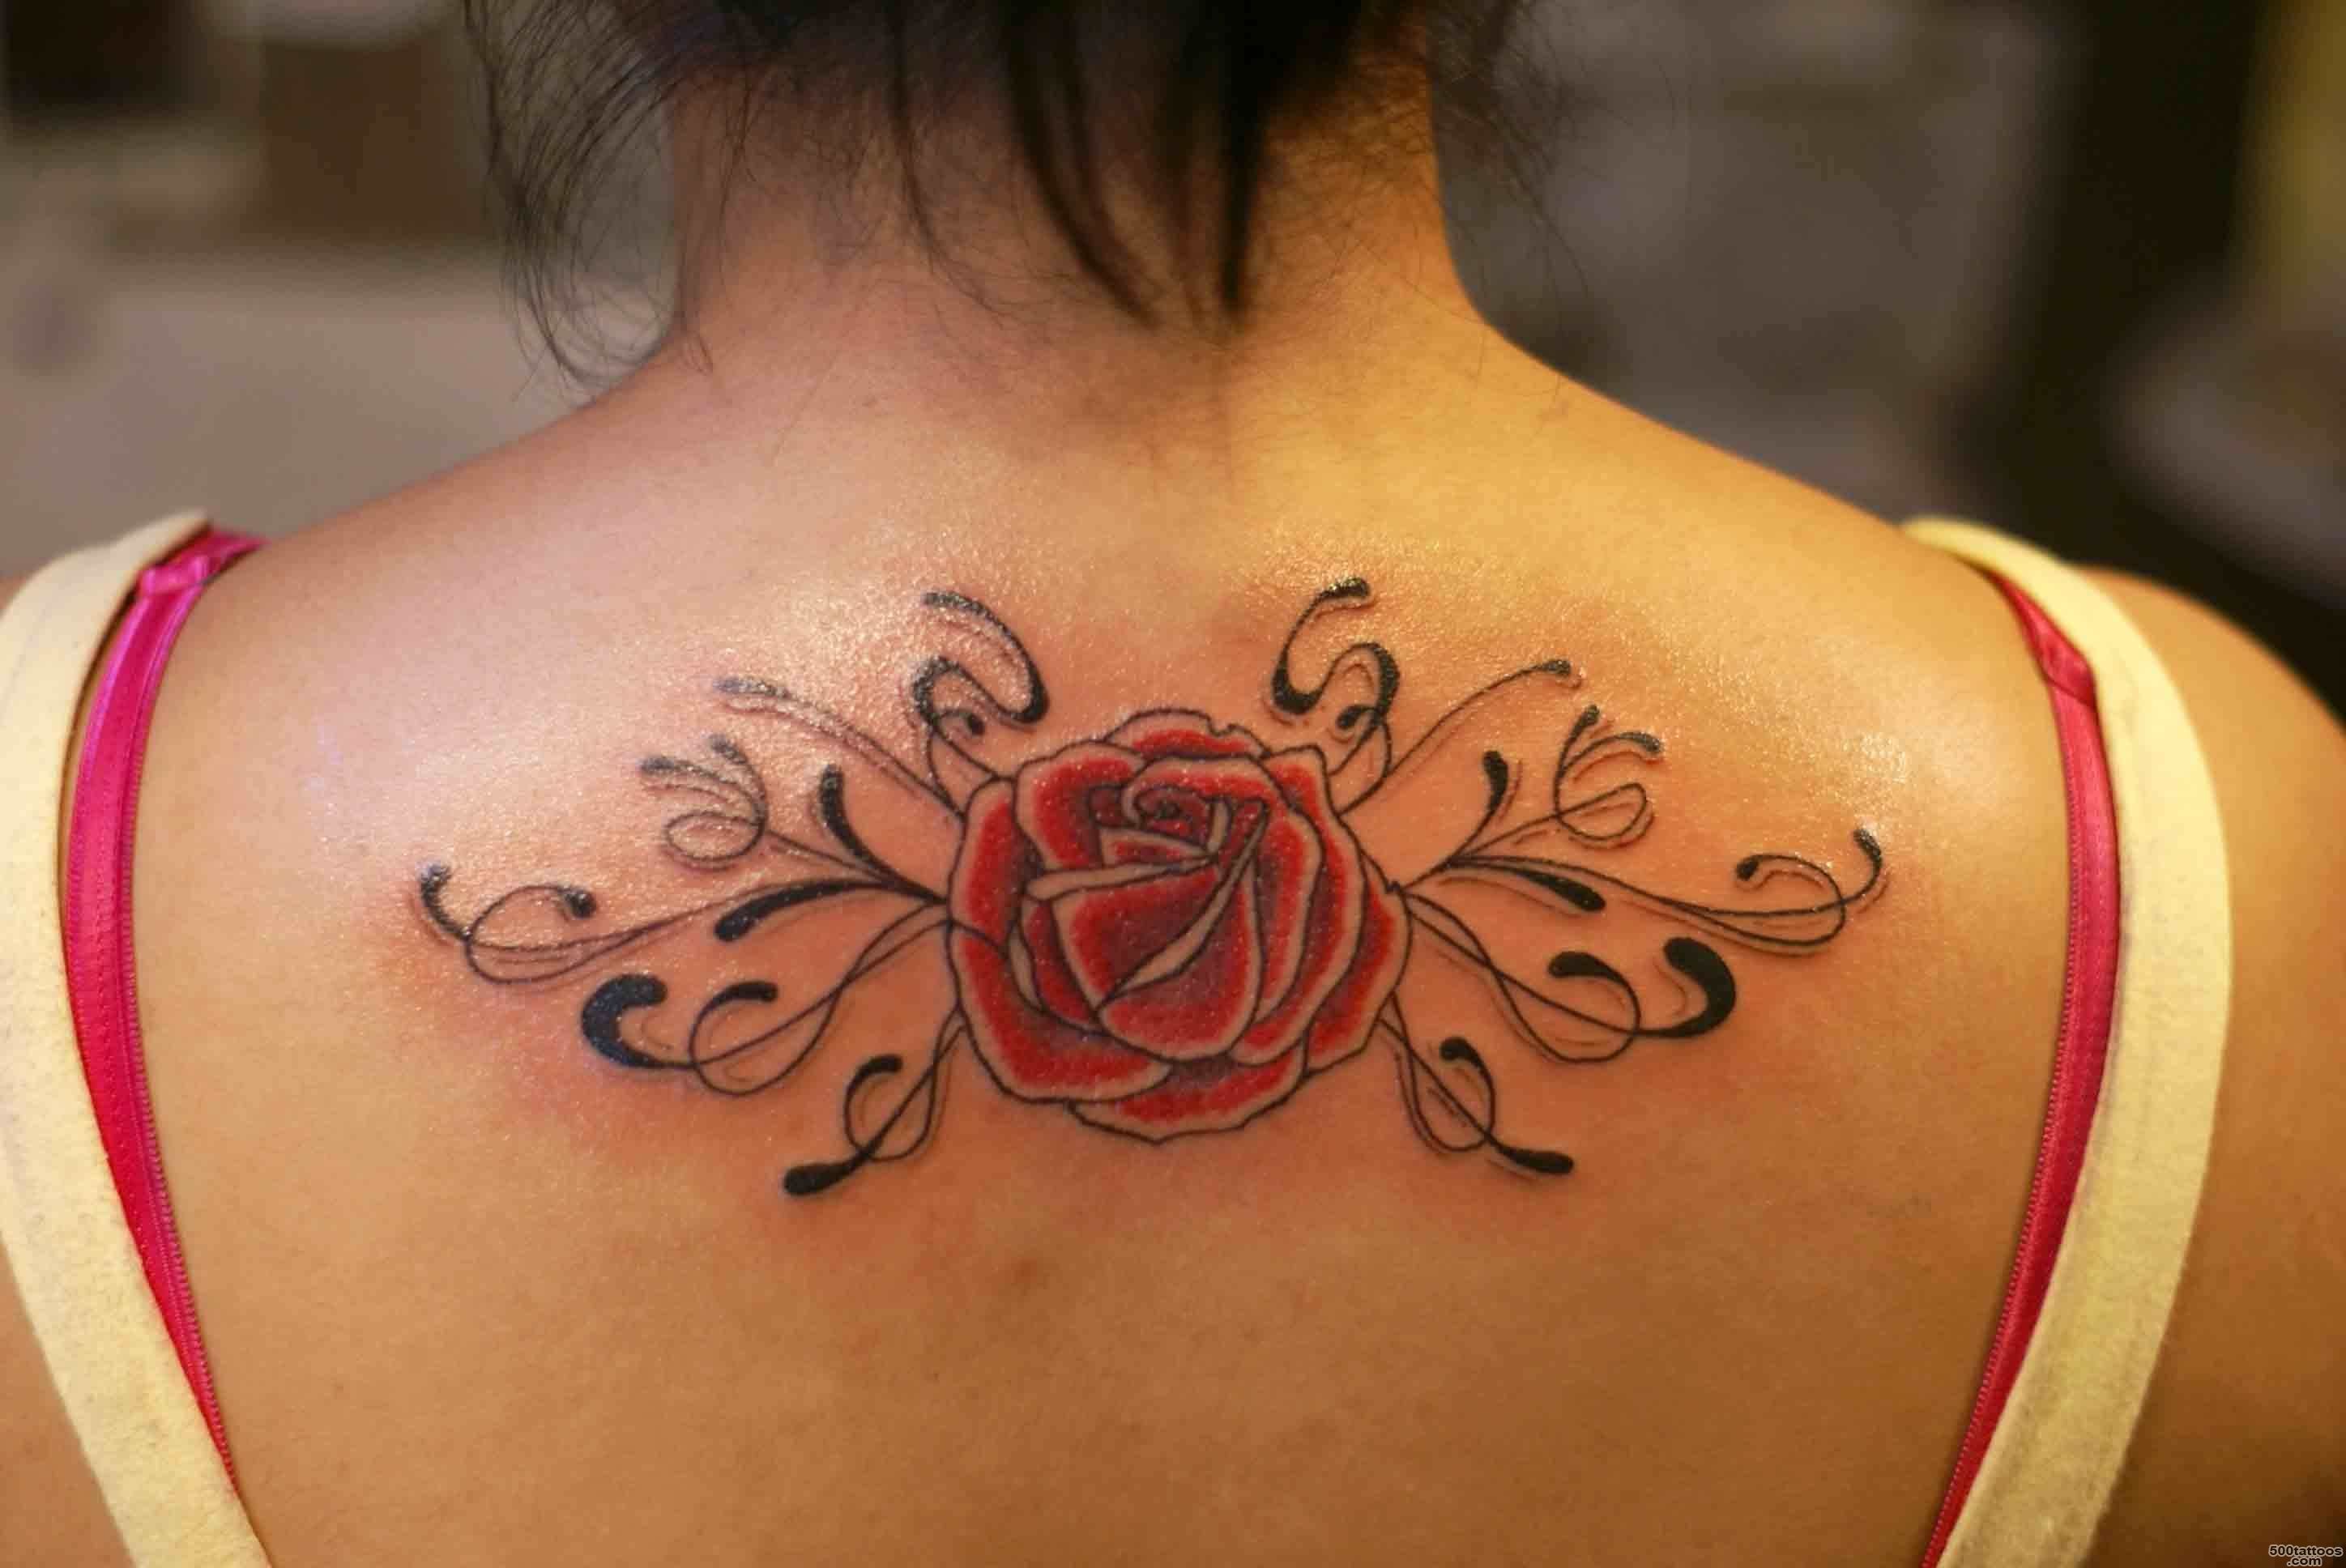 Rose tattoo on her back wallpapers and images   wallpapers ..._1